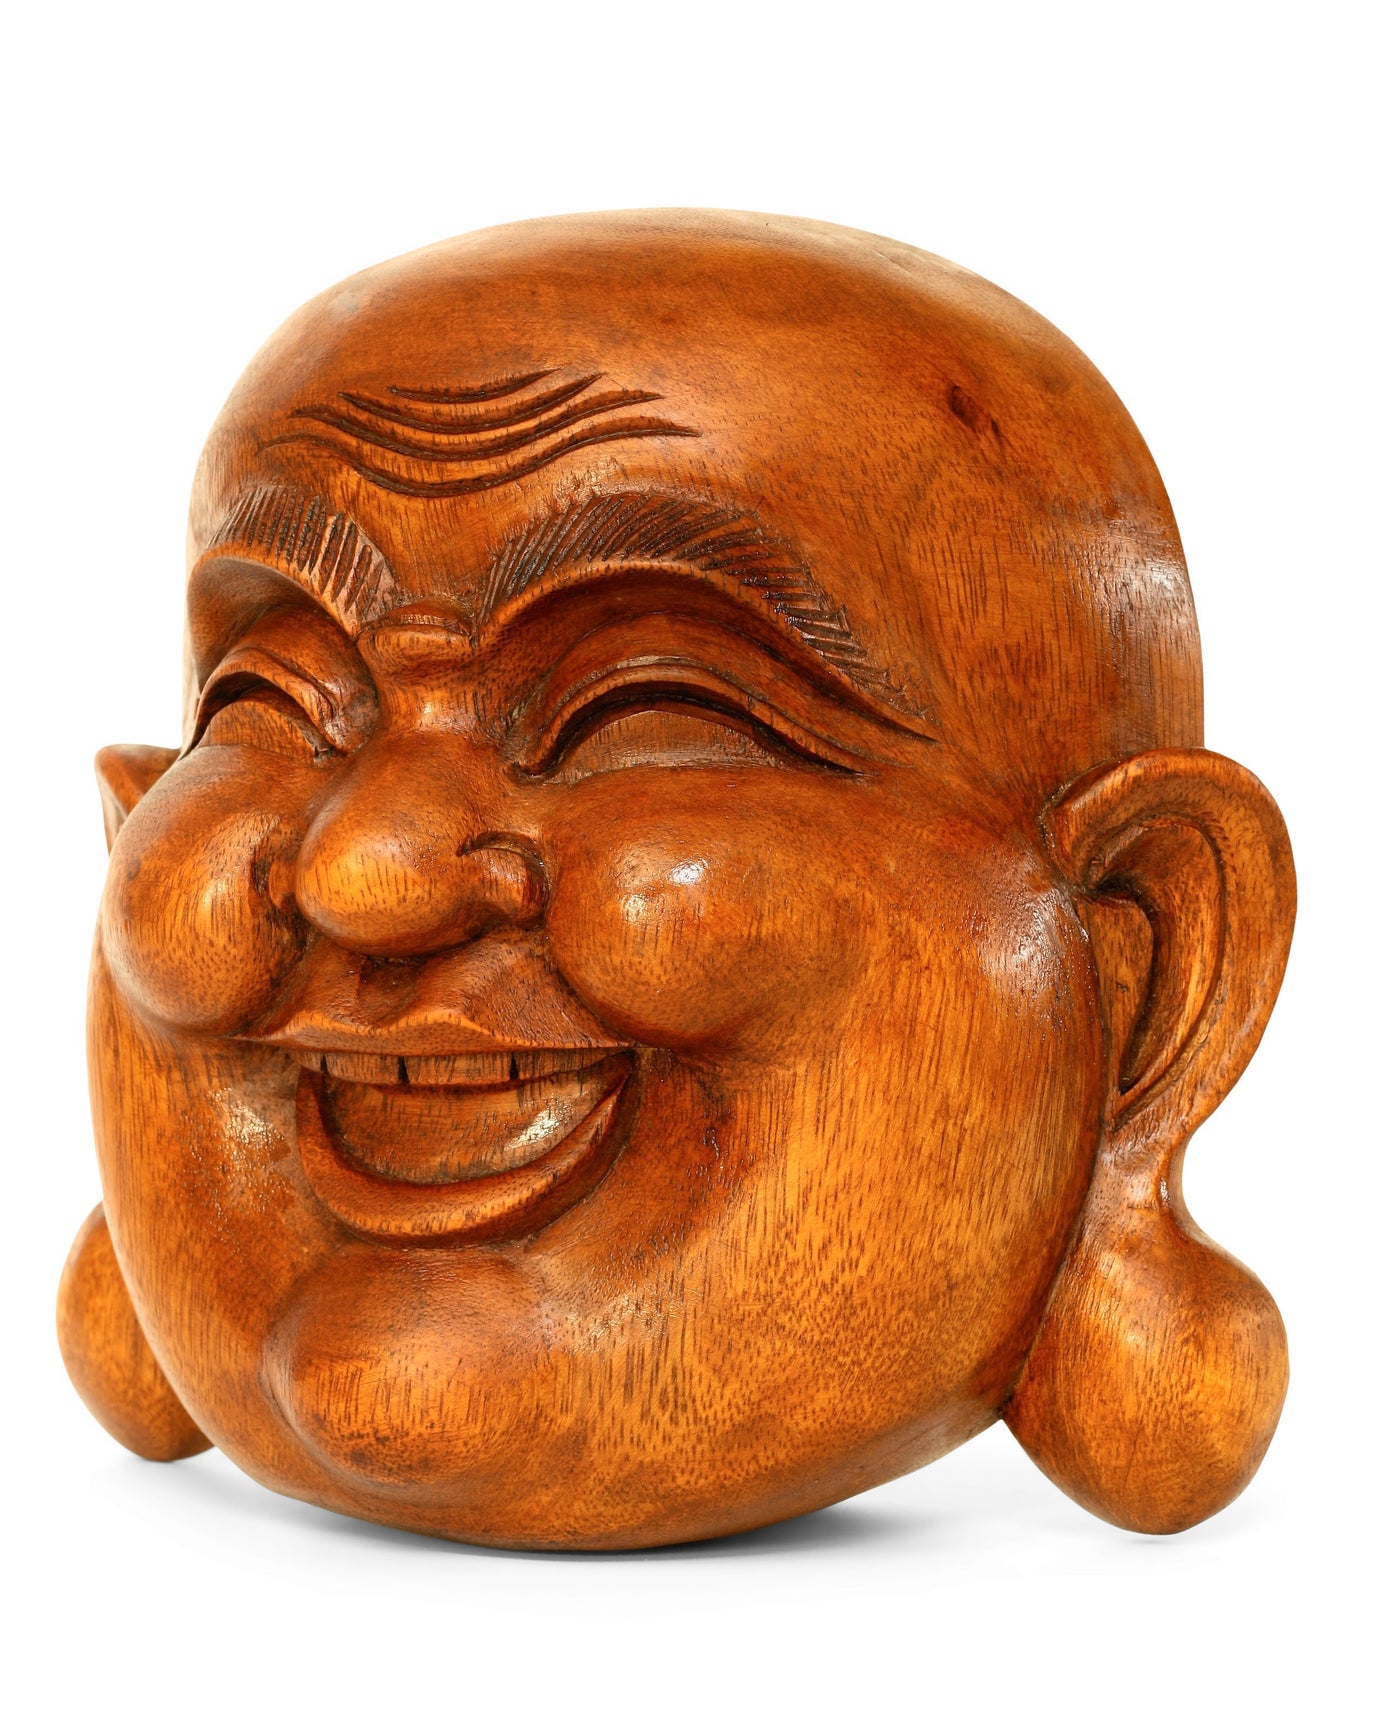 Wooden Wall Mask Laughing Smiling Happy Buddha Head Statue Hand Carved Stand Alone Sculpture Handmade Figurine Decor Handcrafted Art Wall Hanging